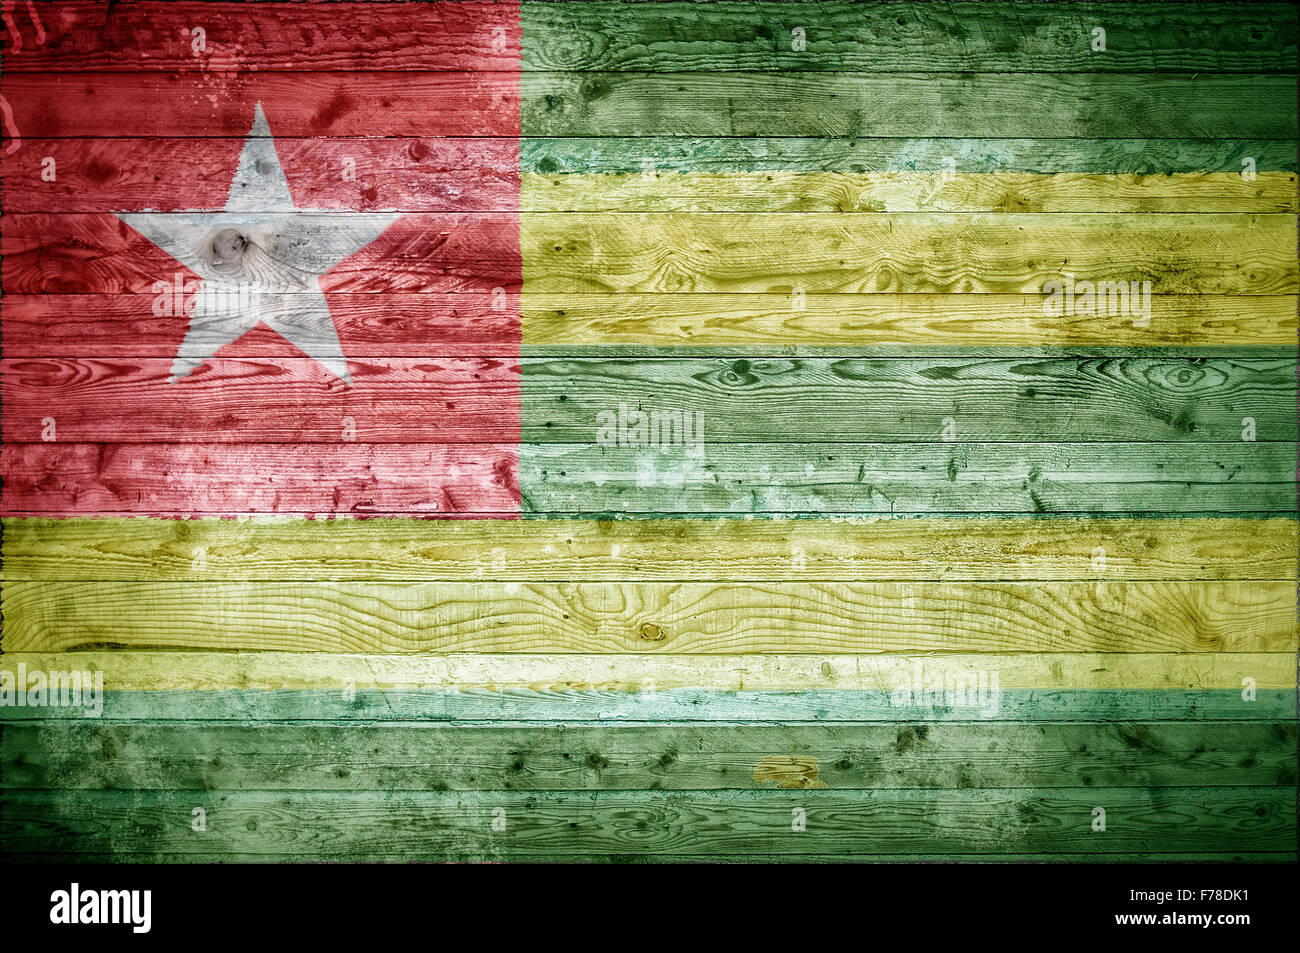 A vignetted background image of the flag of Togo onto wooden boards of a wall or floor. Stock Photo